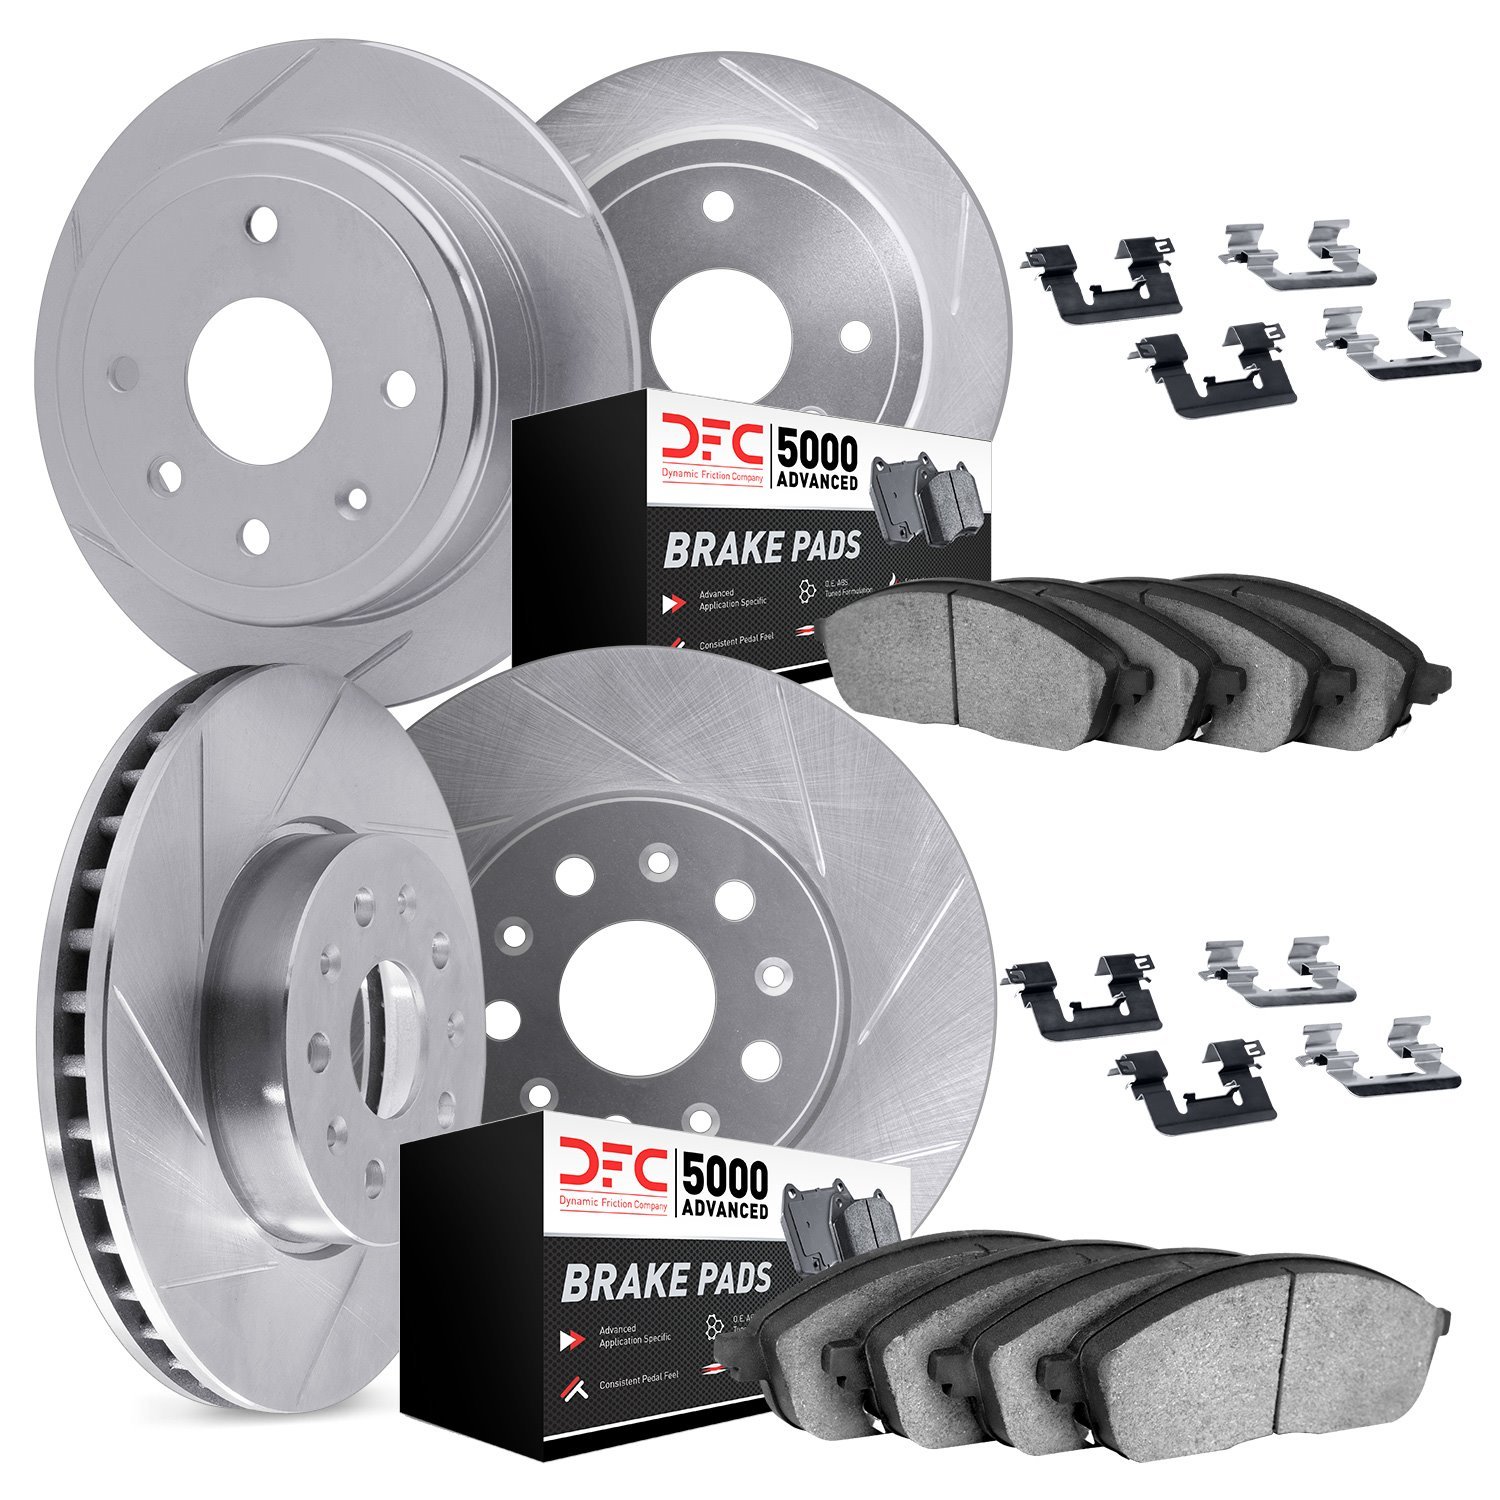 5514-42012 Slotted Brake Rotors w/5000 Advanced Brake Pads Kit & Hardware [Silver], 2007-2018 Mopar, Position: Front and Rear